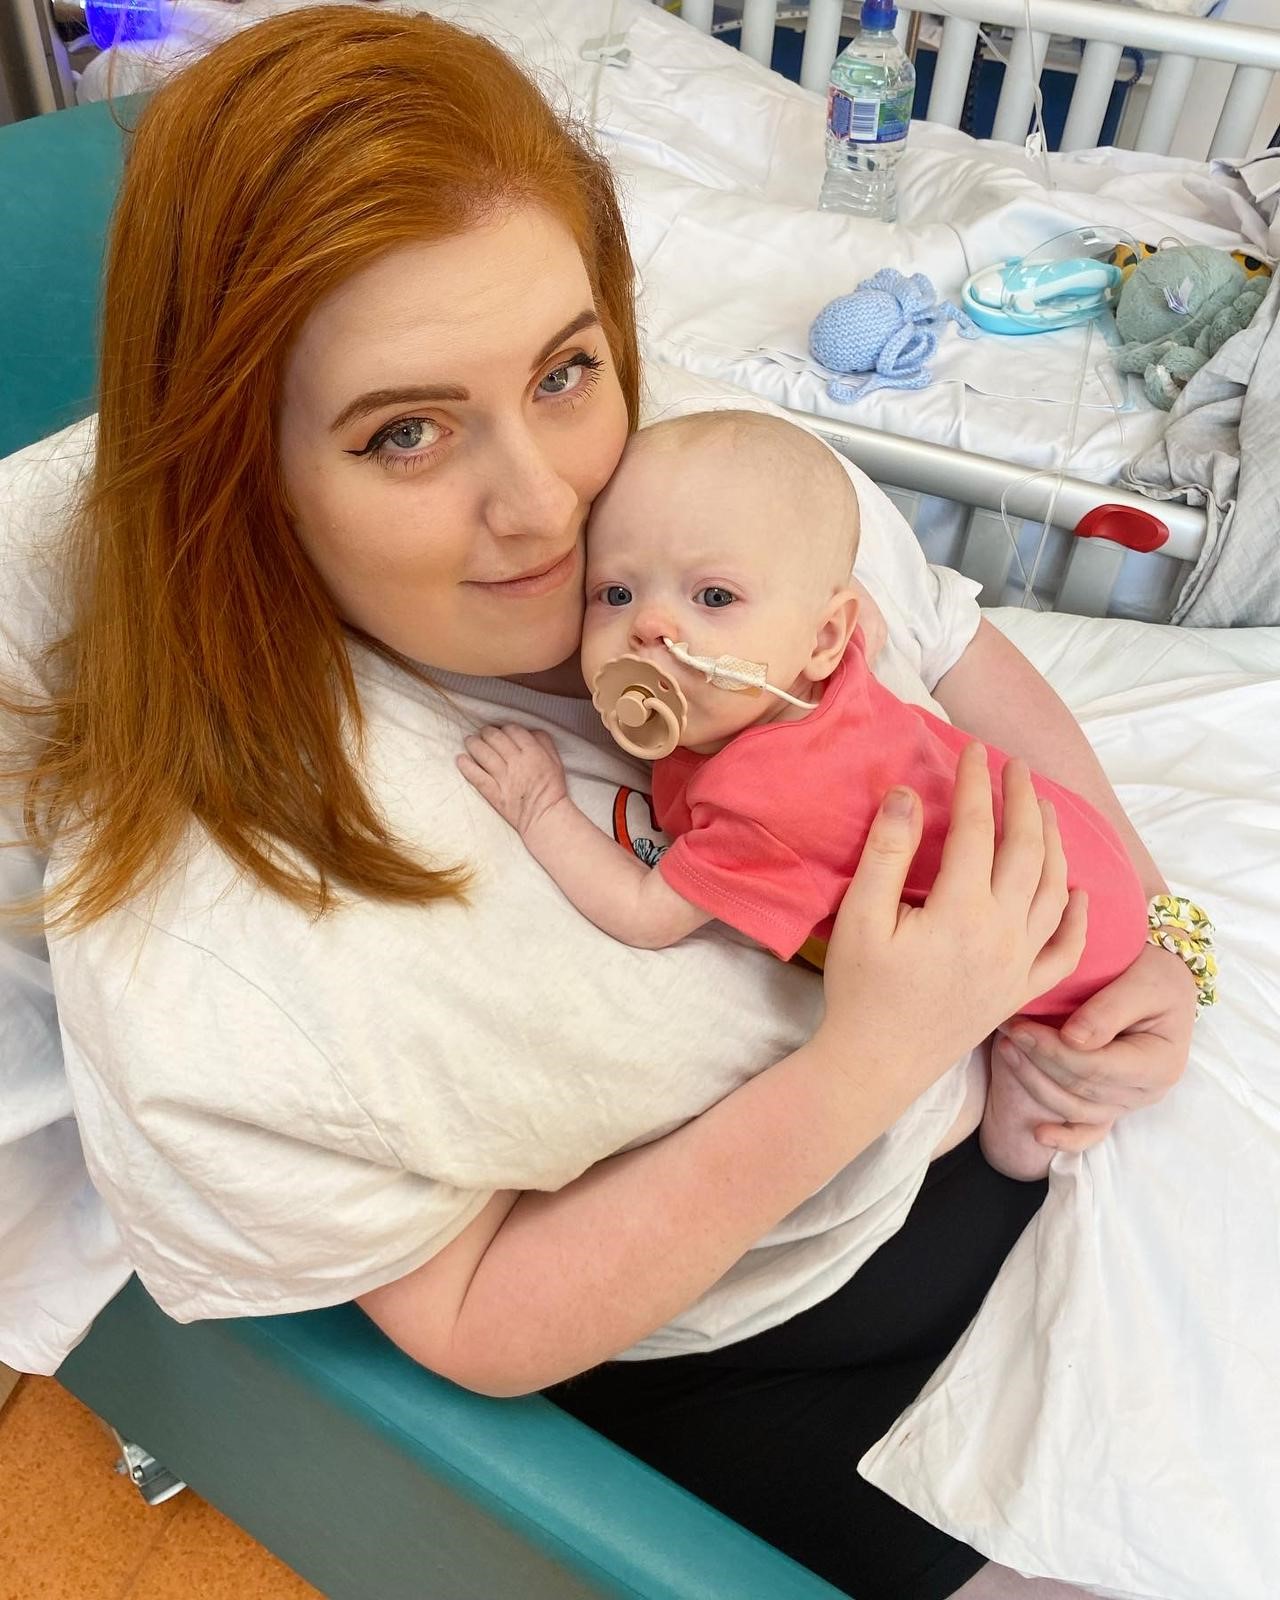 Roisin and her daughter Aila in hospital